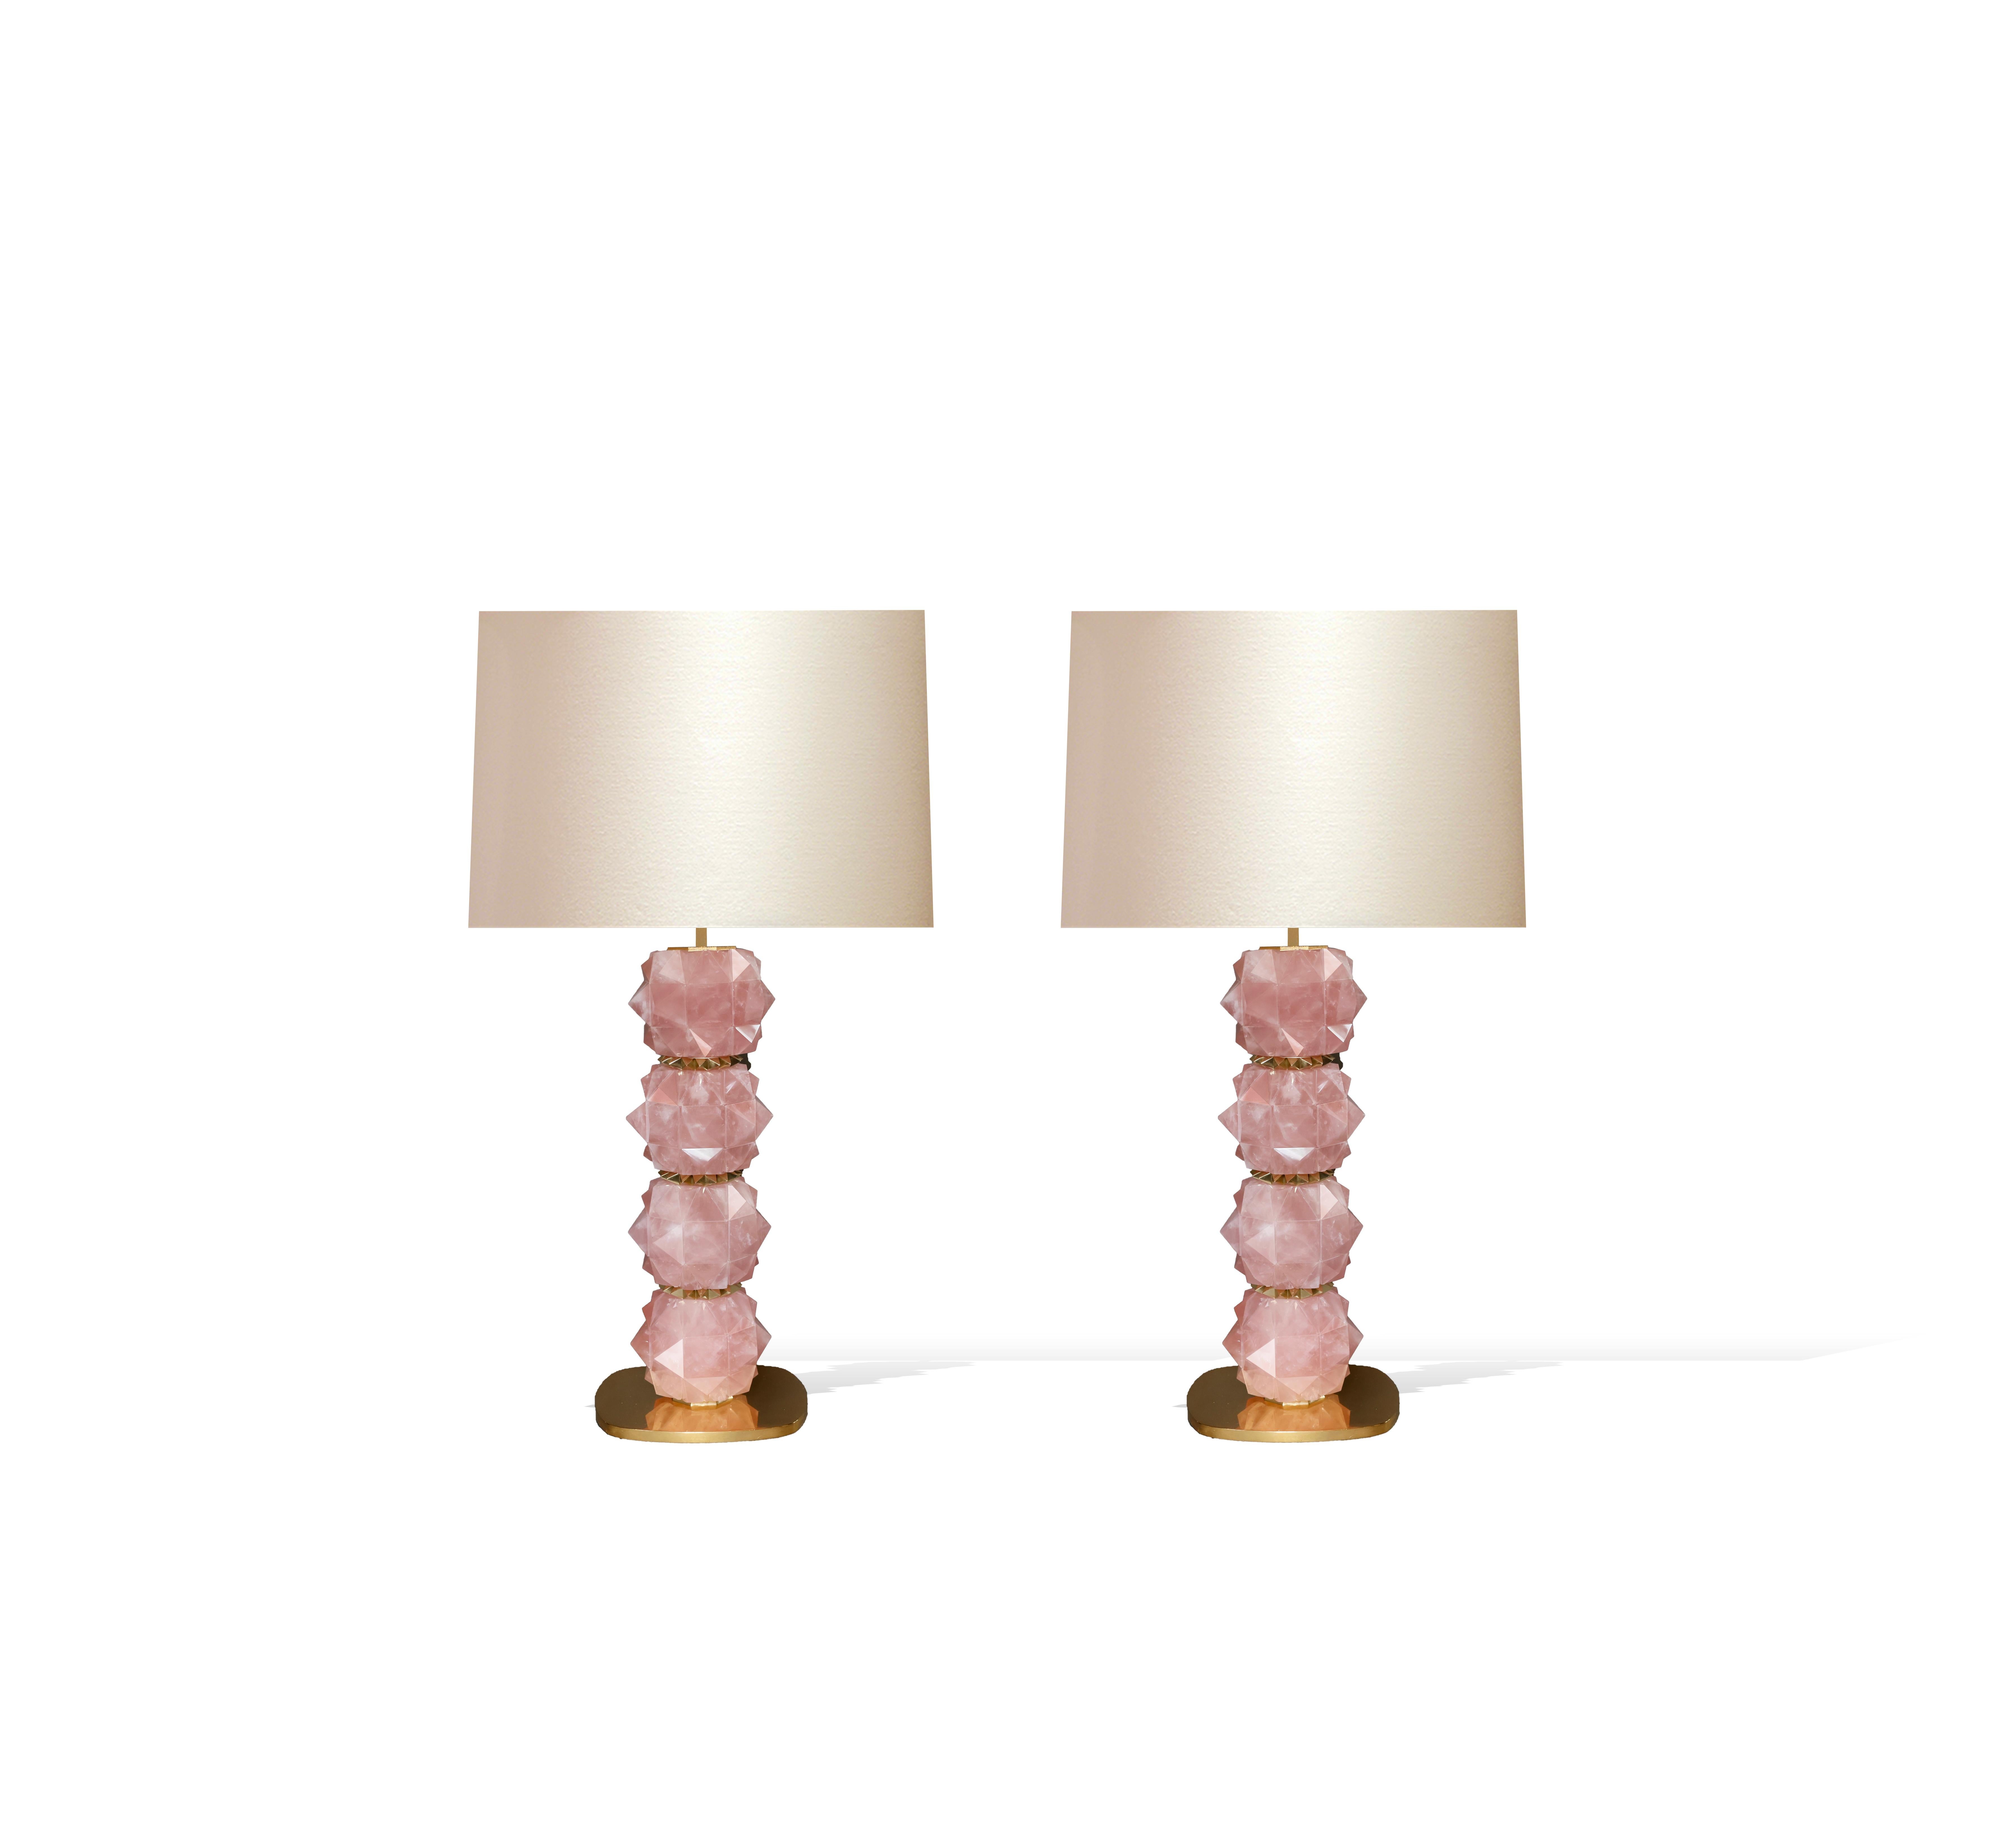 pair of multi faceted pink rock crystal candy lamps with polished brass decorations, created by Phoenix gallery.
Lampshade not included.
To the top of the rock crystal 16 inch.
    